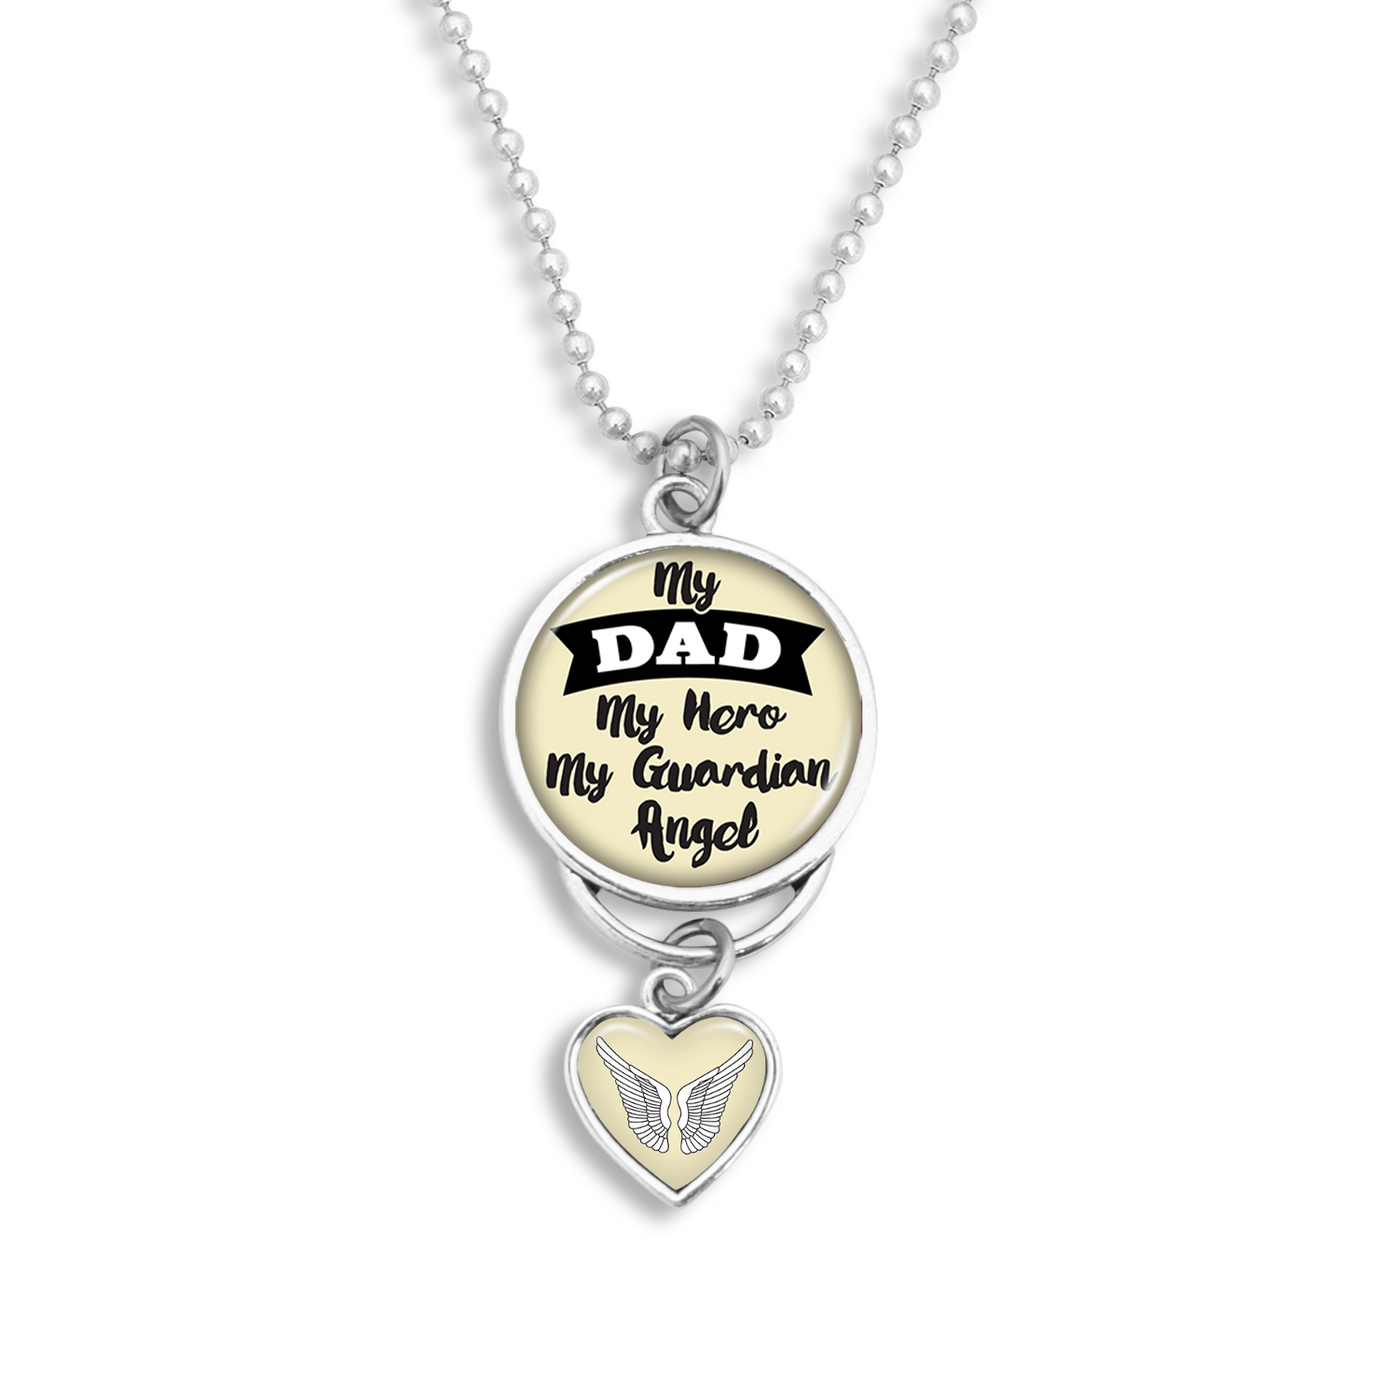 My Dad My Hero Rearview Mirror Charm